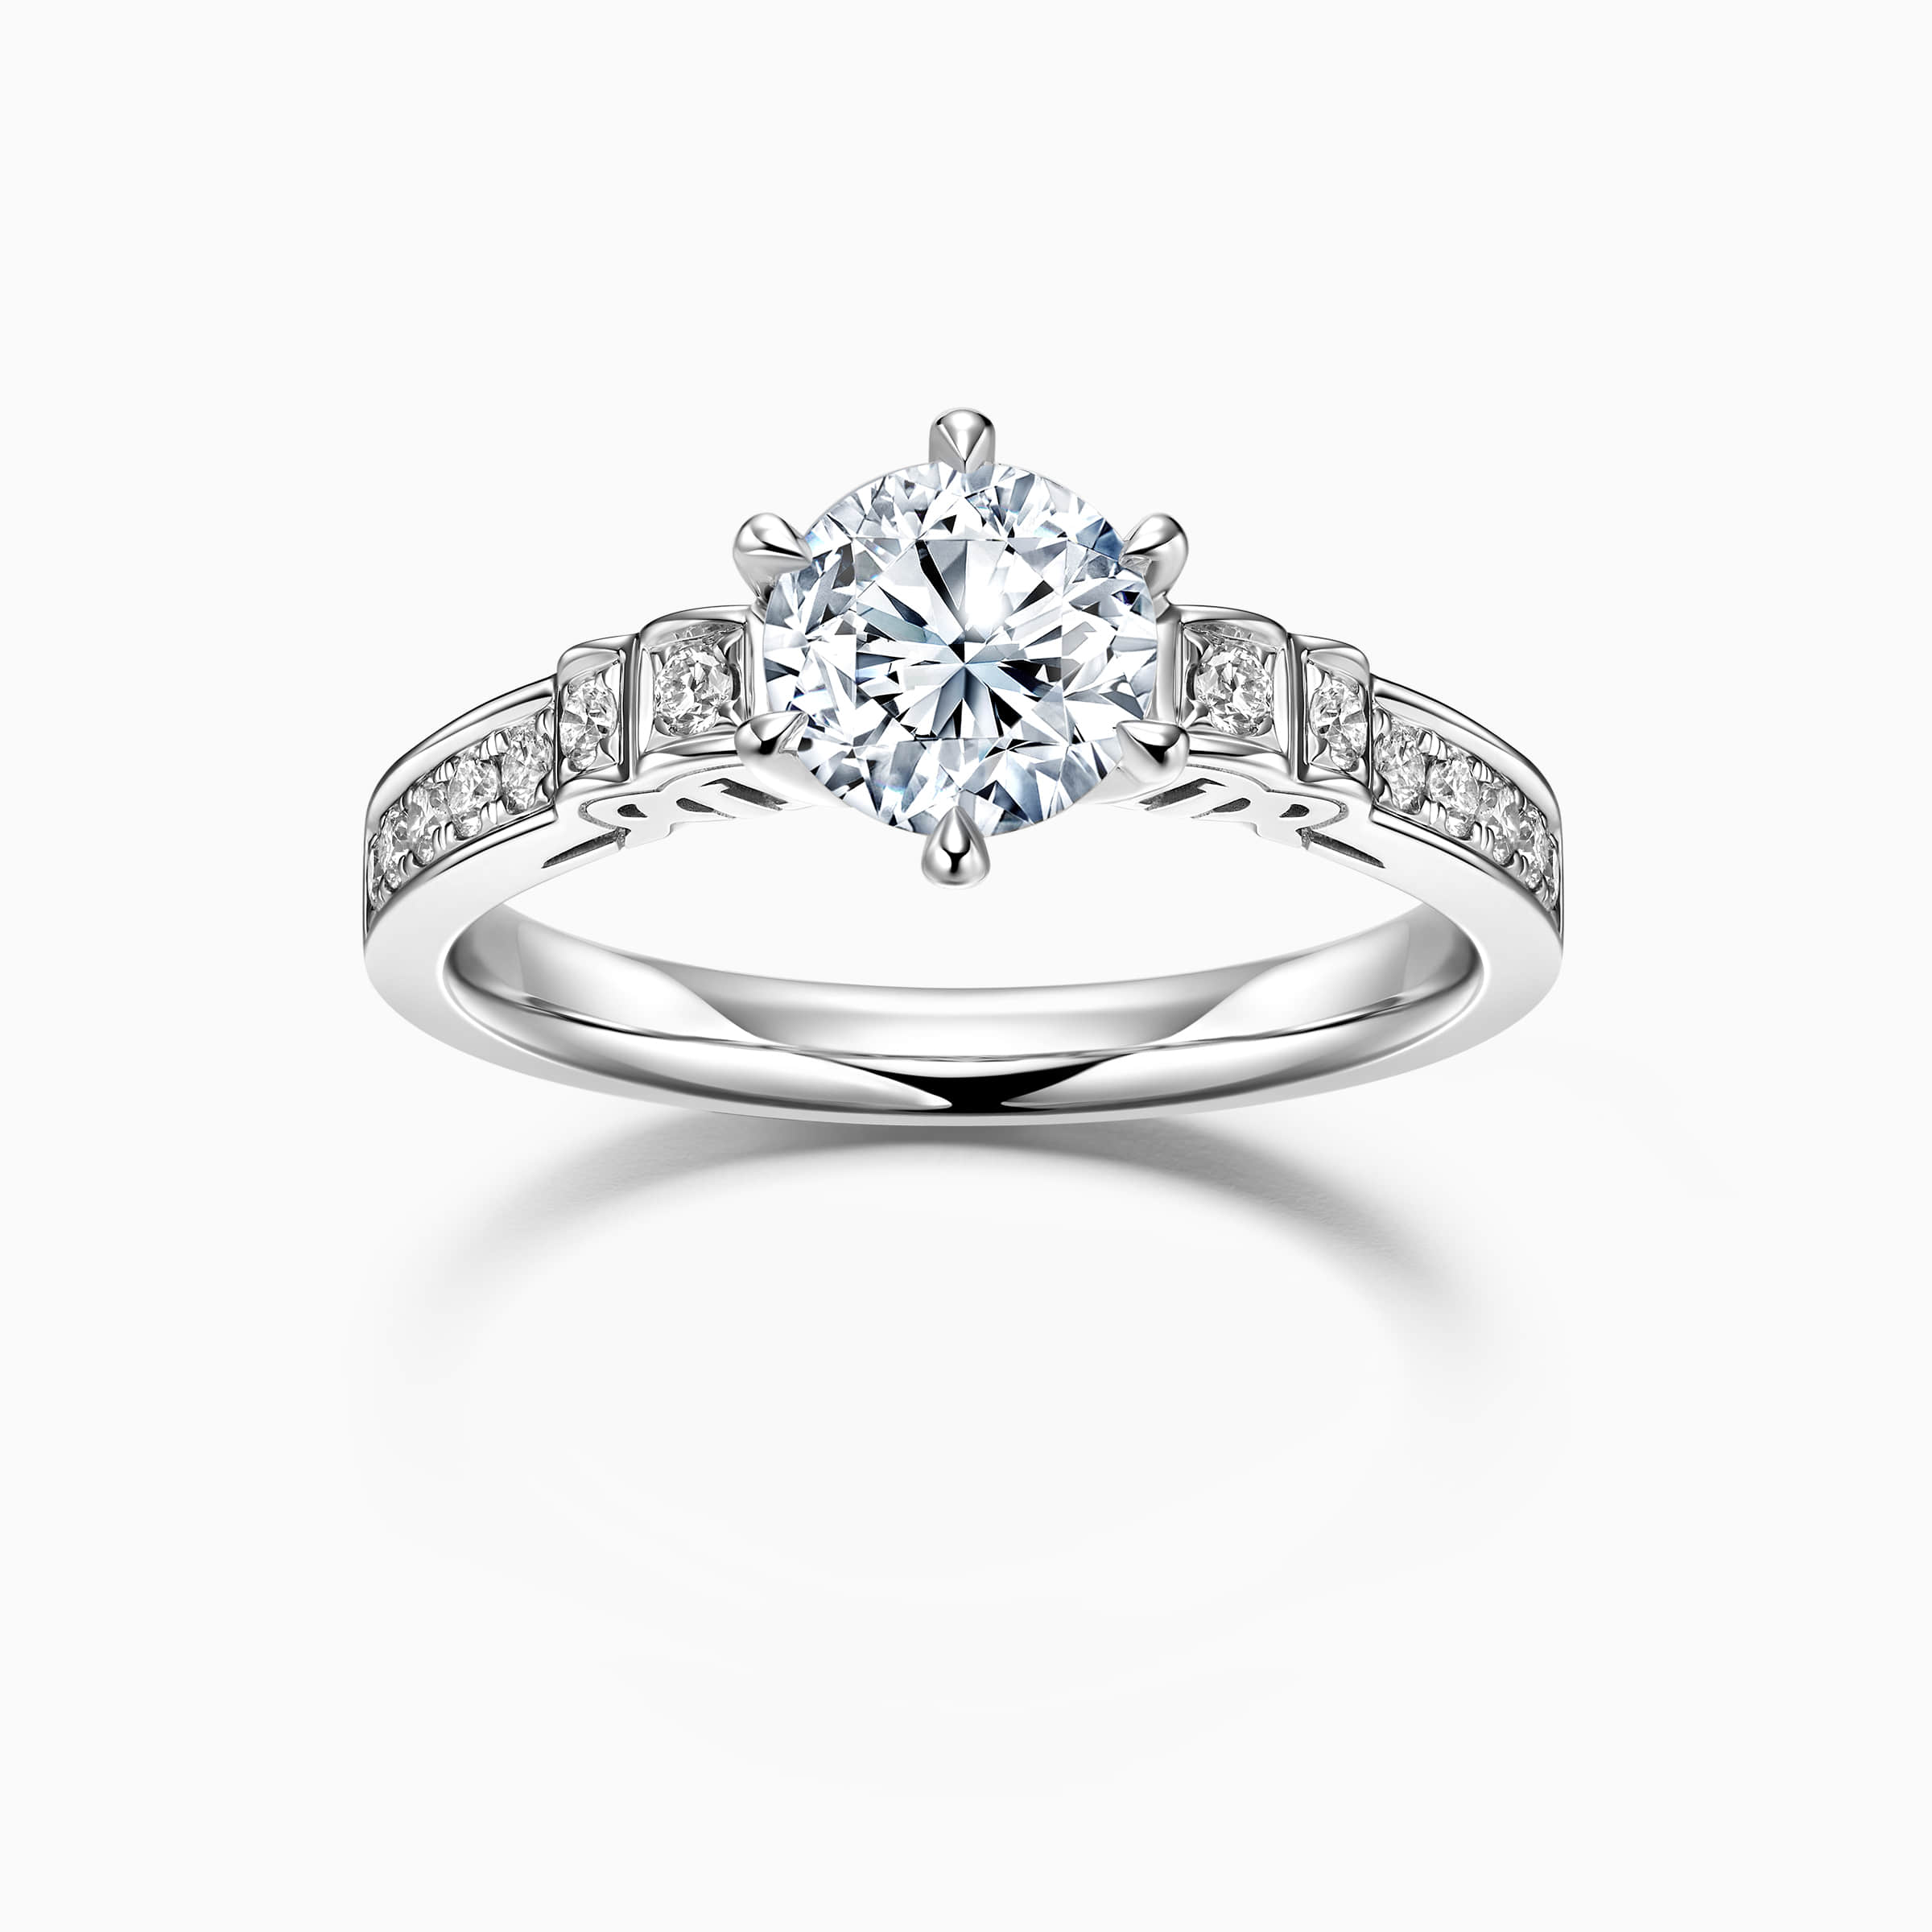 Darry Ring Love Mark engagement ring